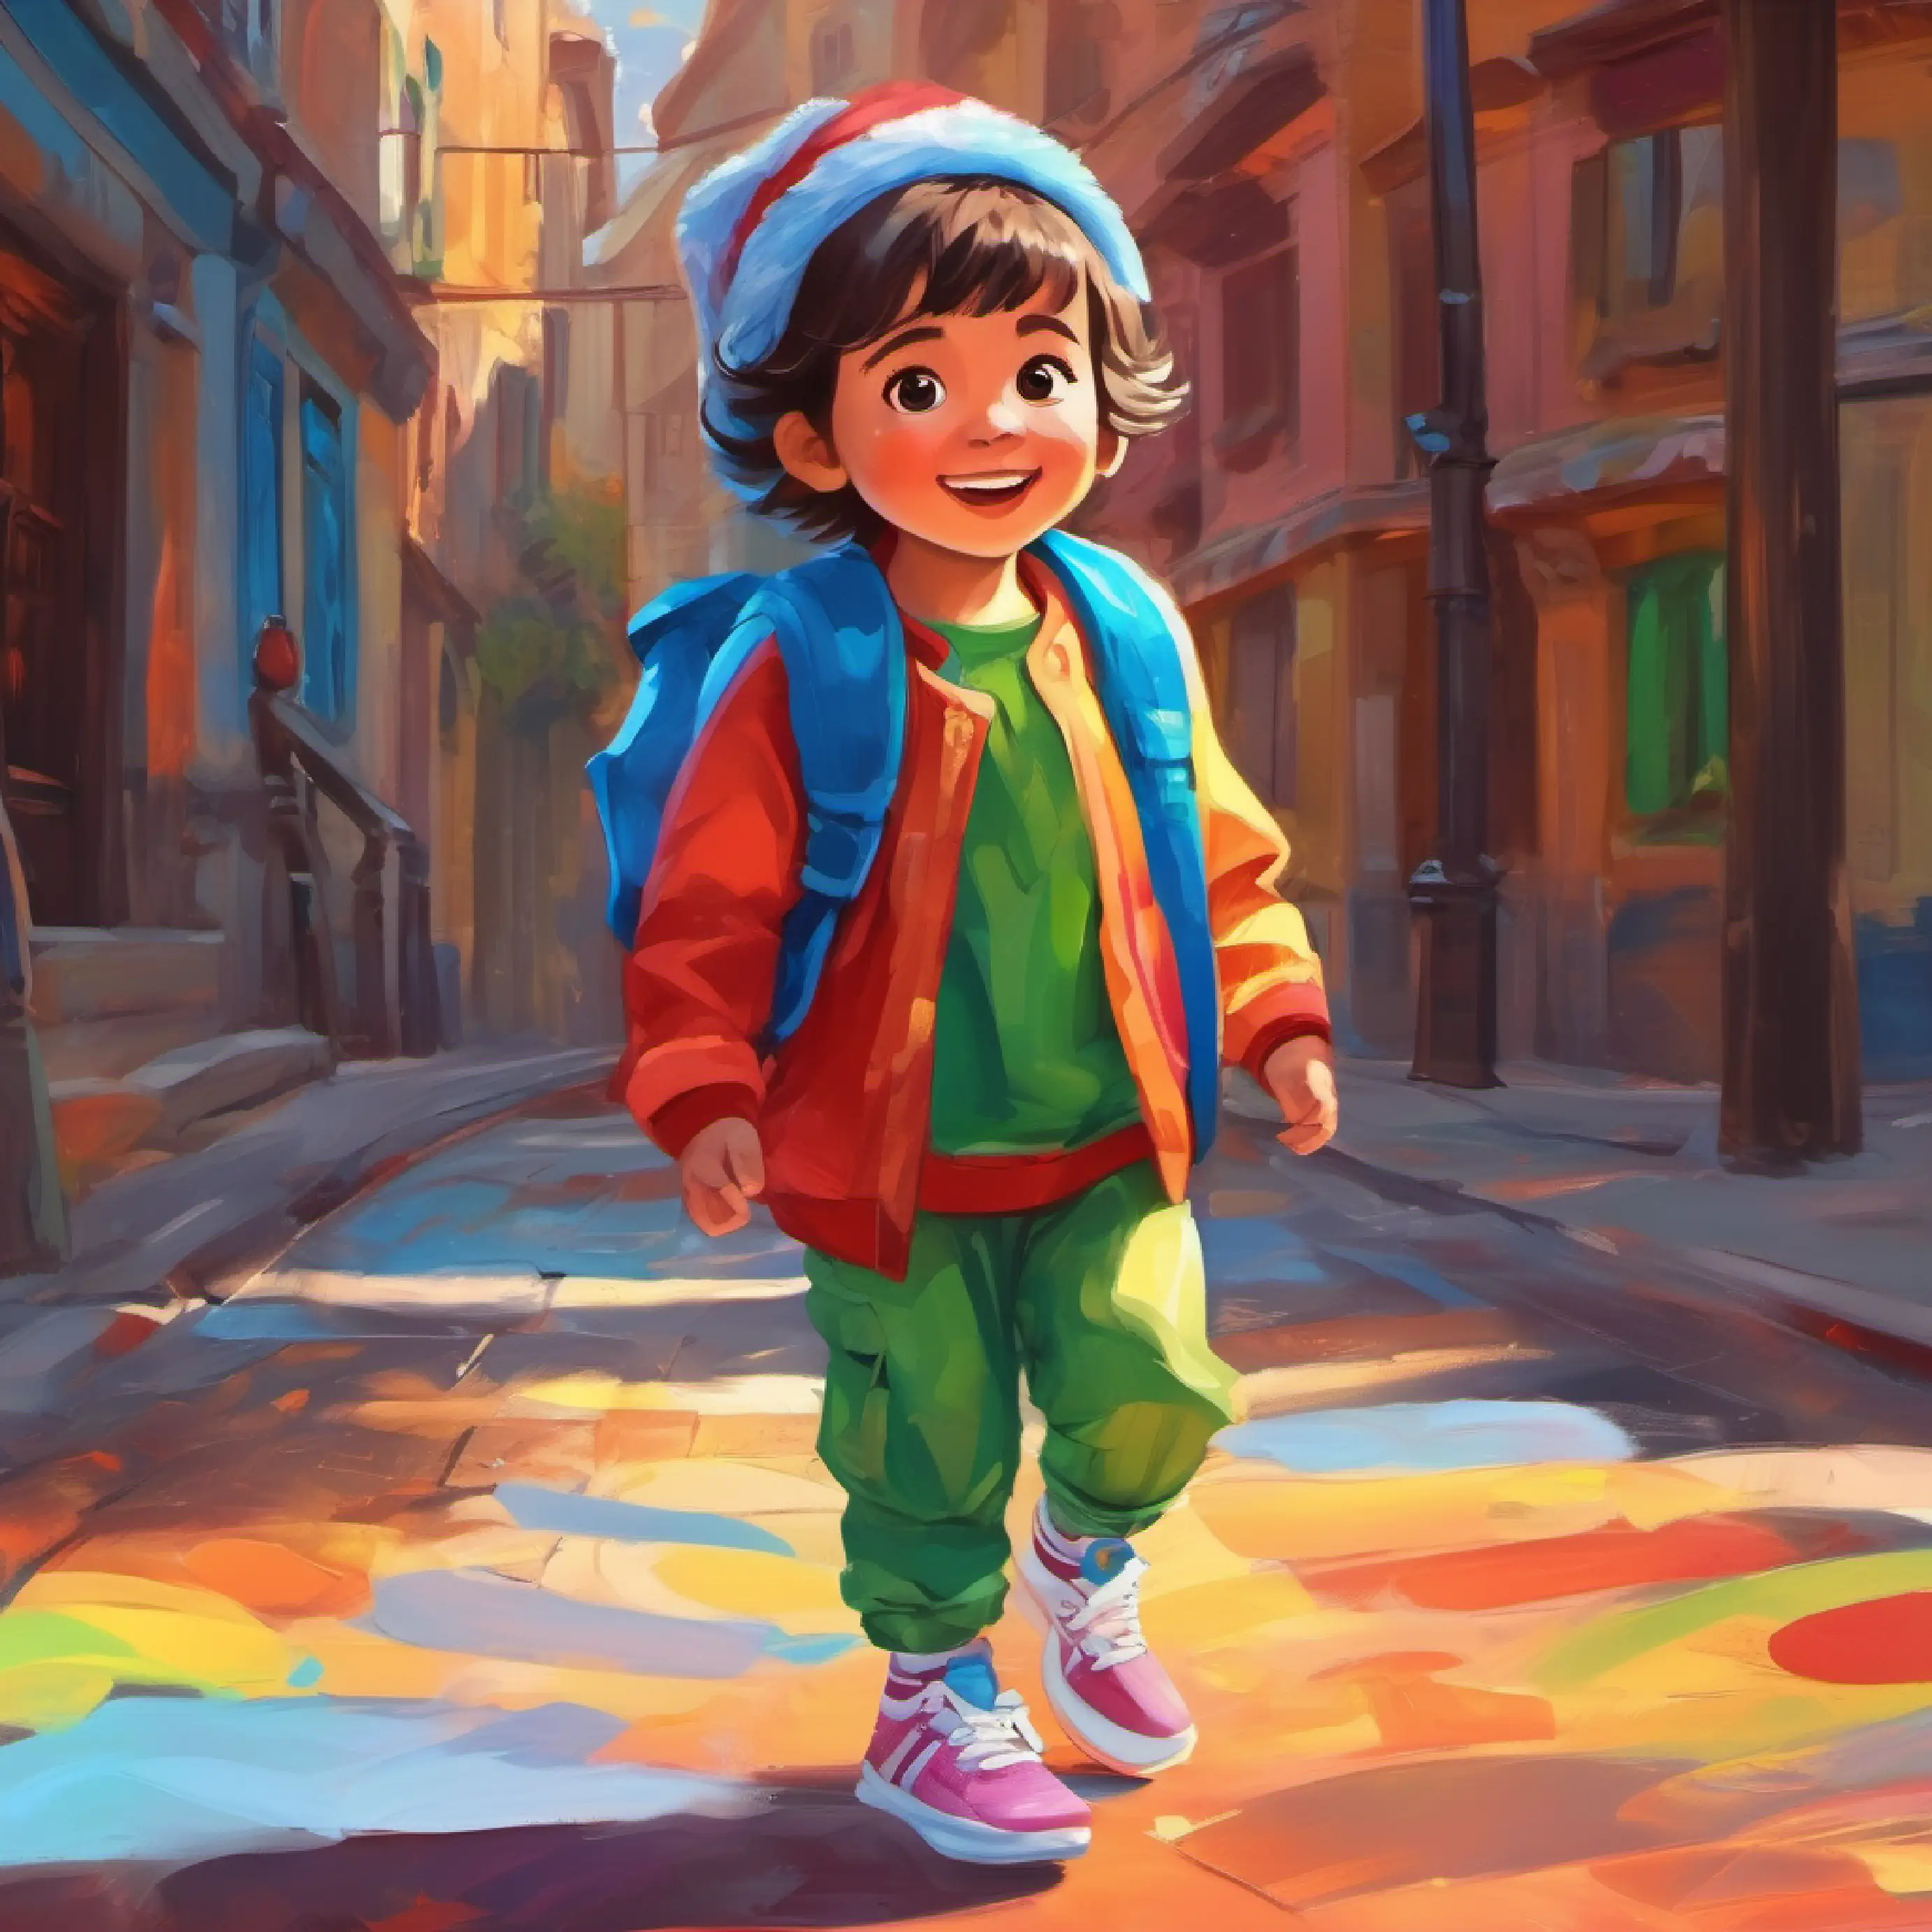 Child with joyful eyes, wears colorful clothes and sneakers discovers the respect for gender-diverse individuals.